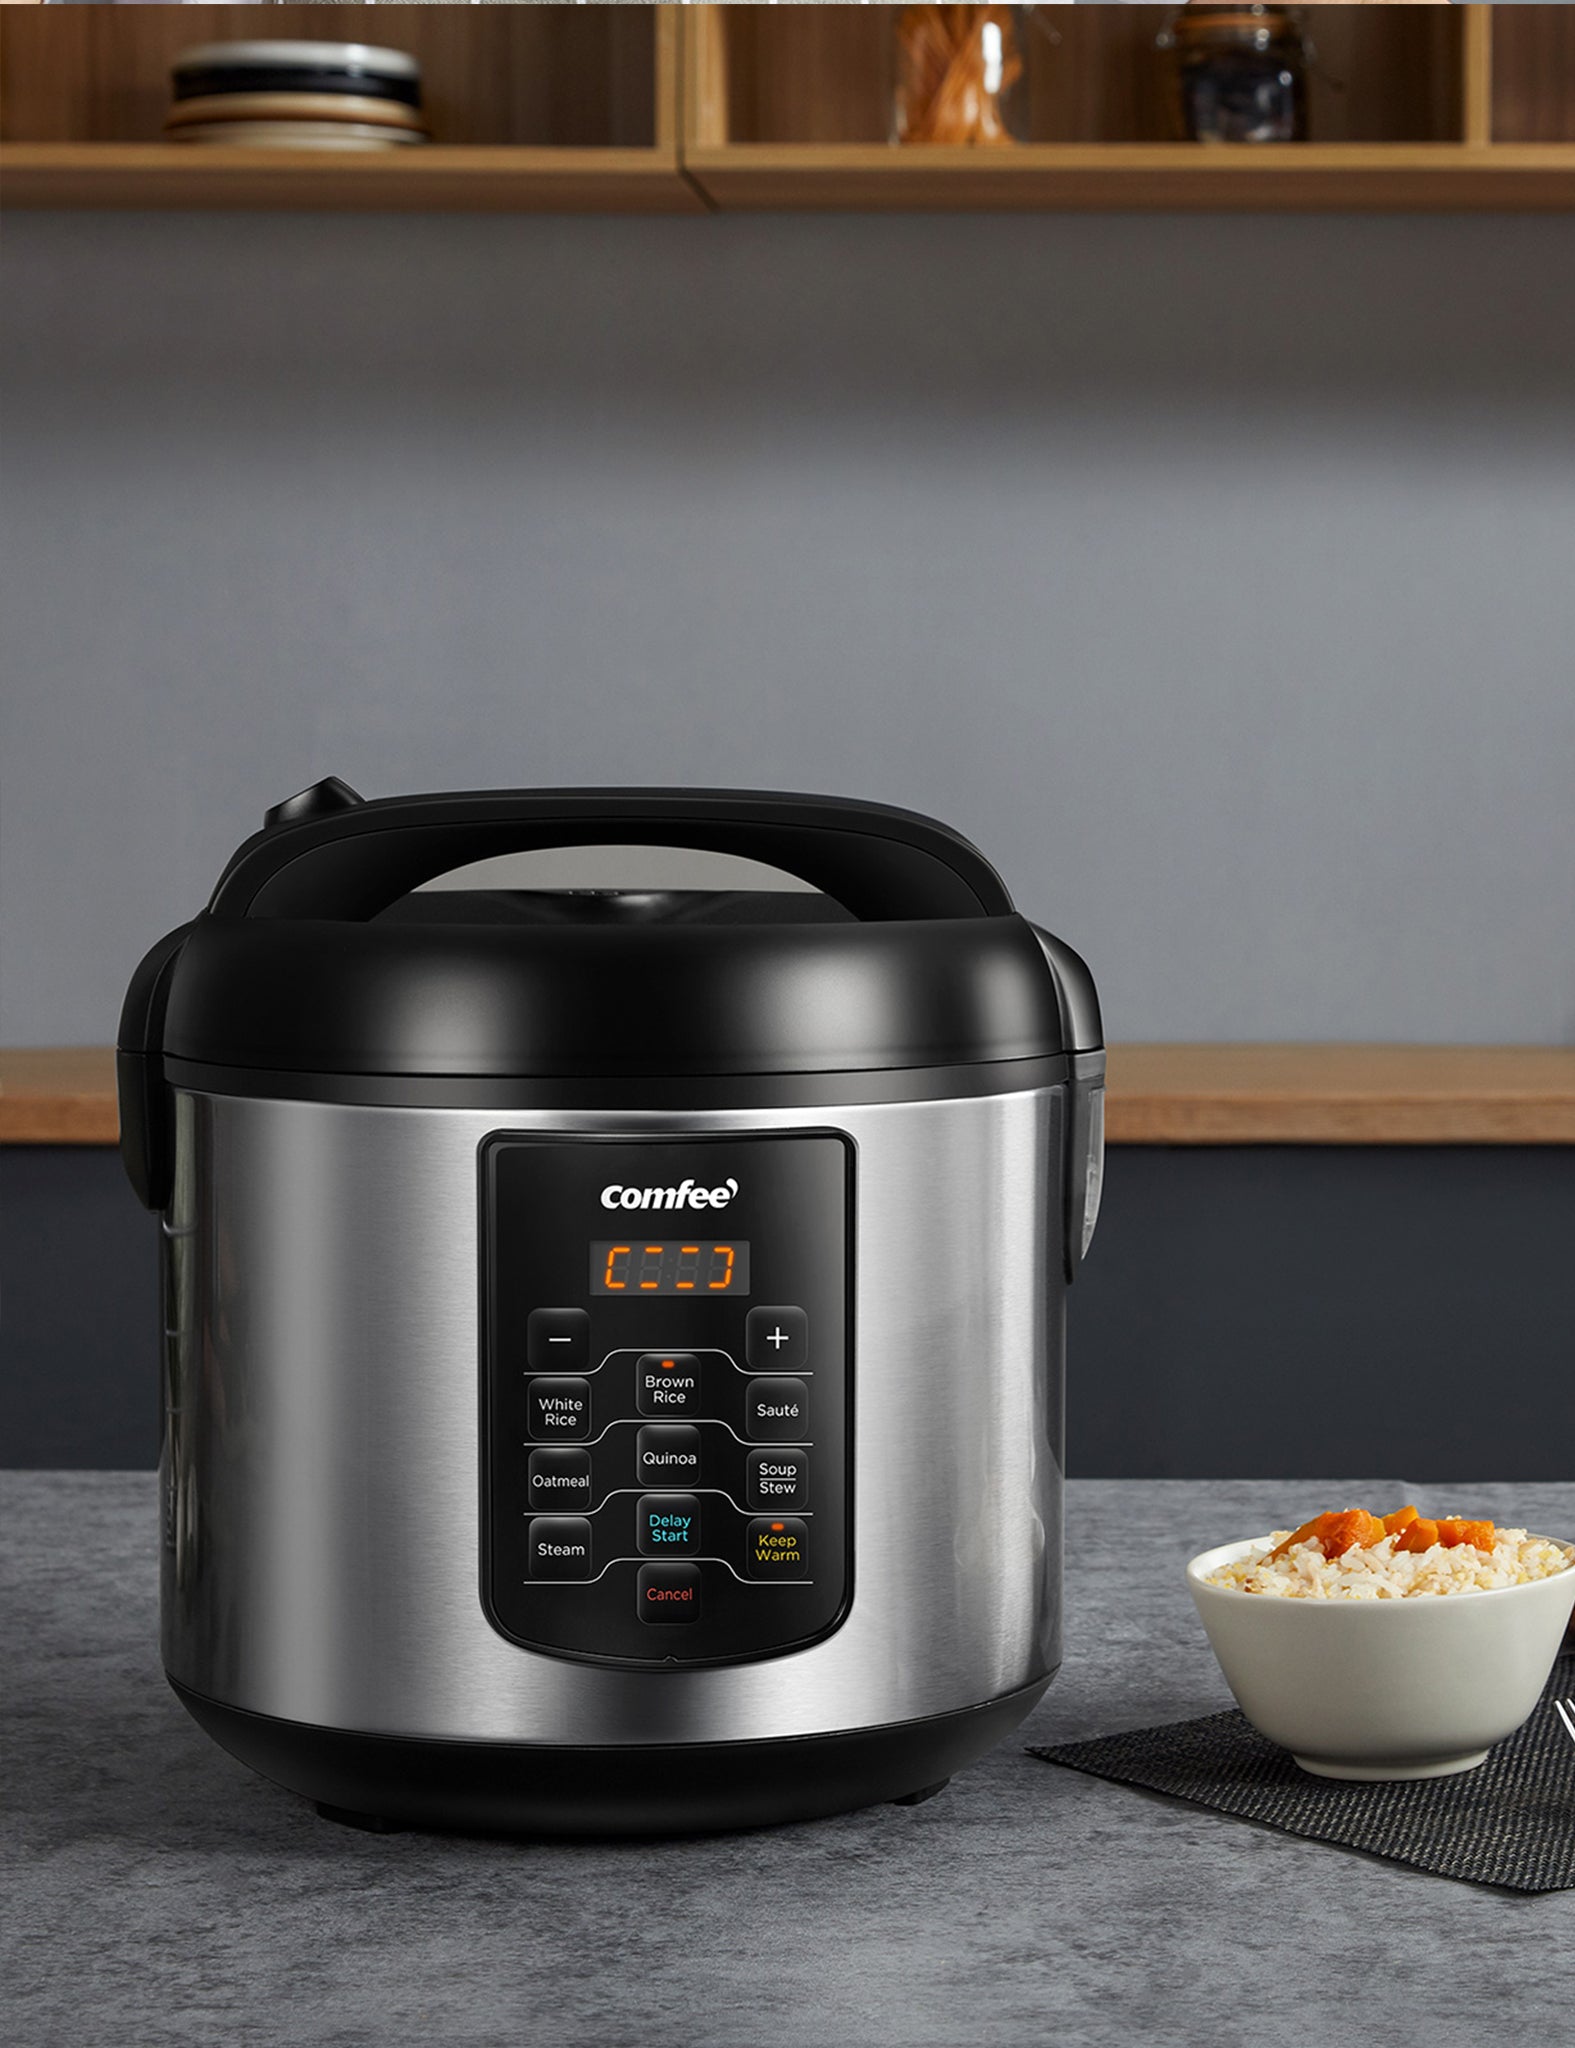 comfee stainless steel rice cooker next to a bowl of rice